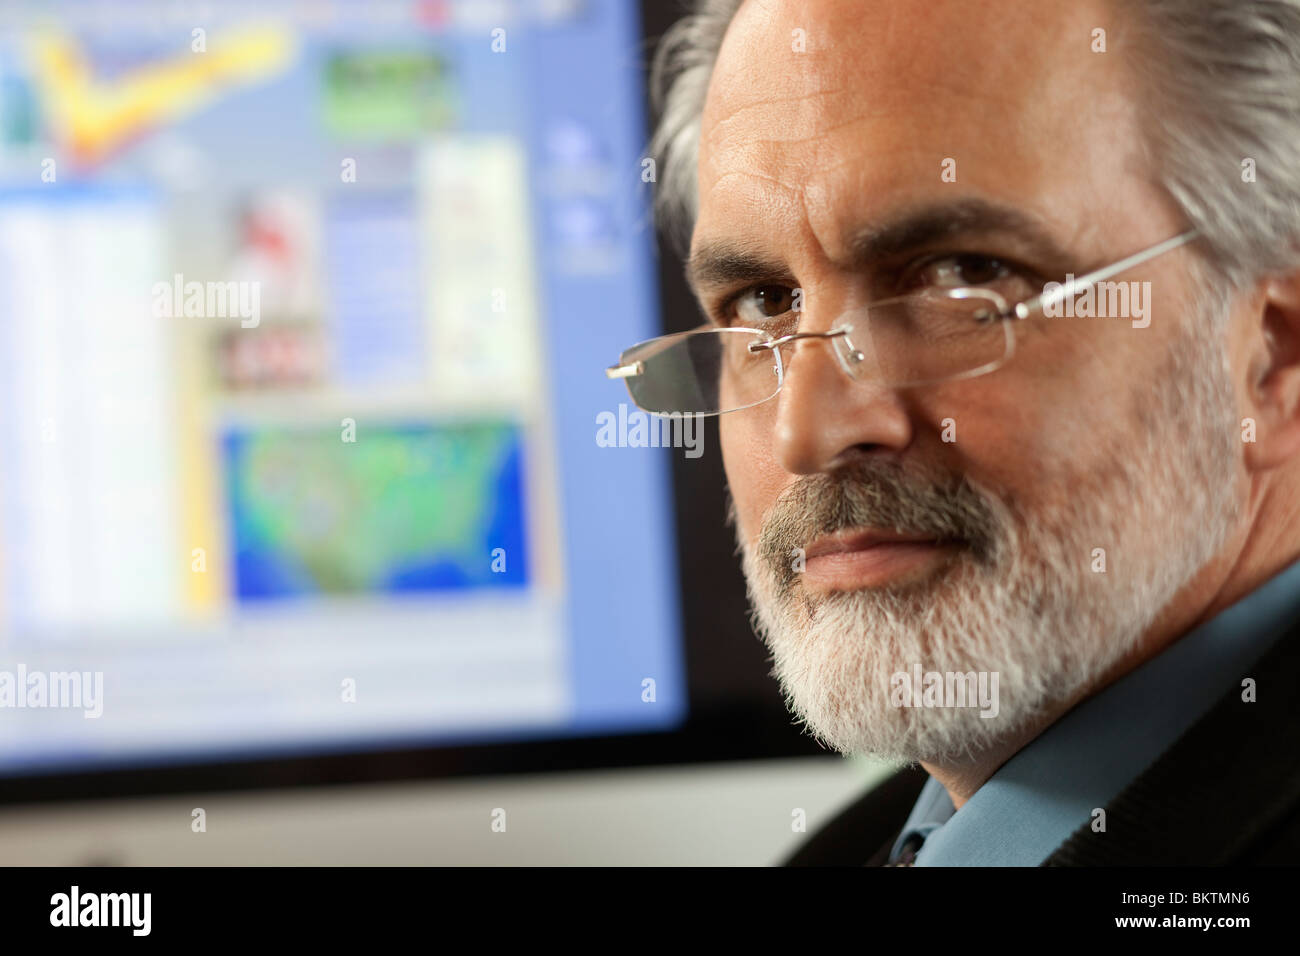 Close-up portrait of a businessman wearing eyeglasses and looking at the camera with a computer monitor in the background. Stock Photo